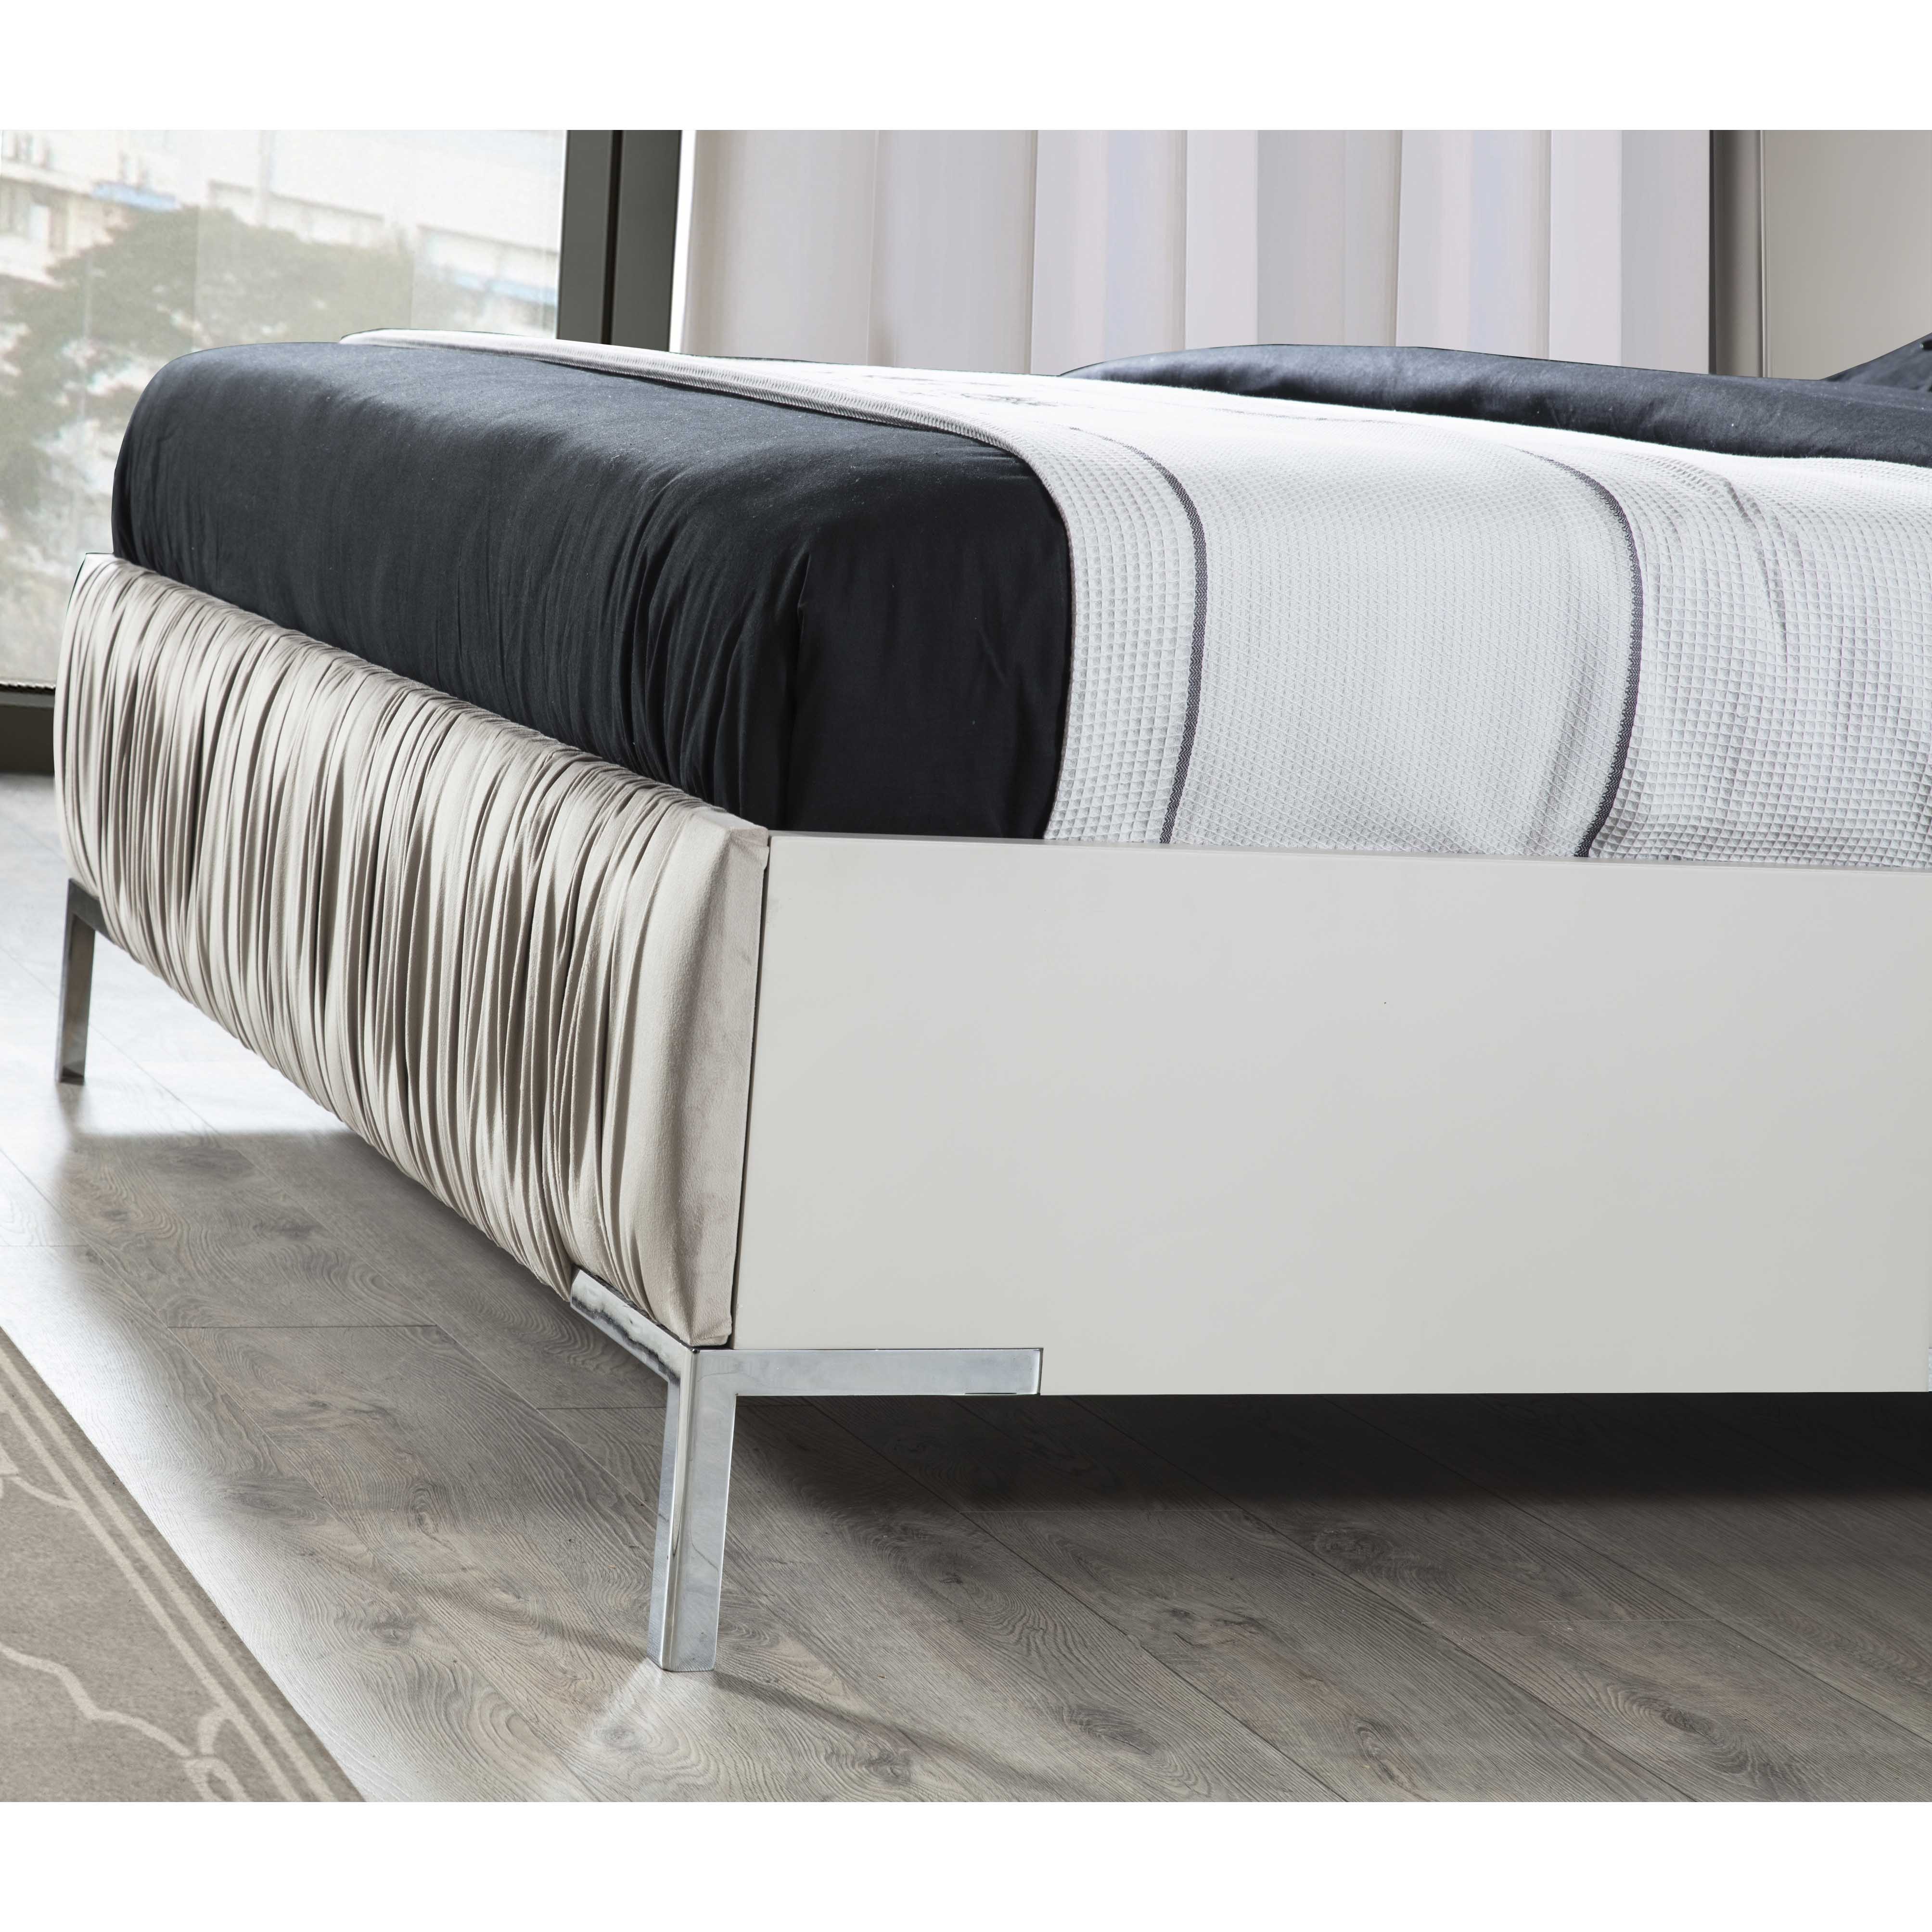 Silver Bed With Storage